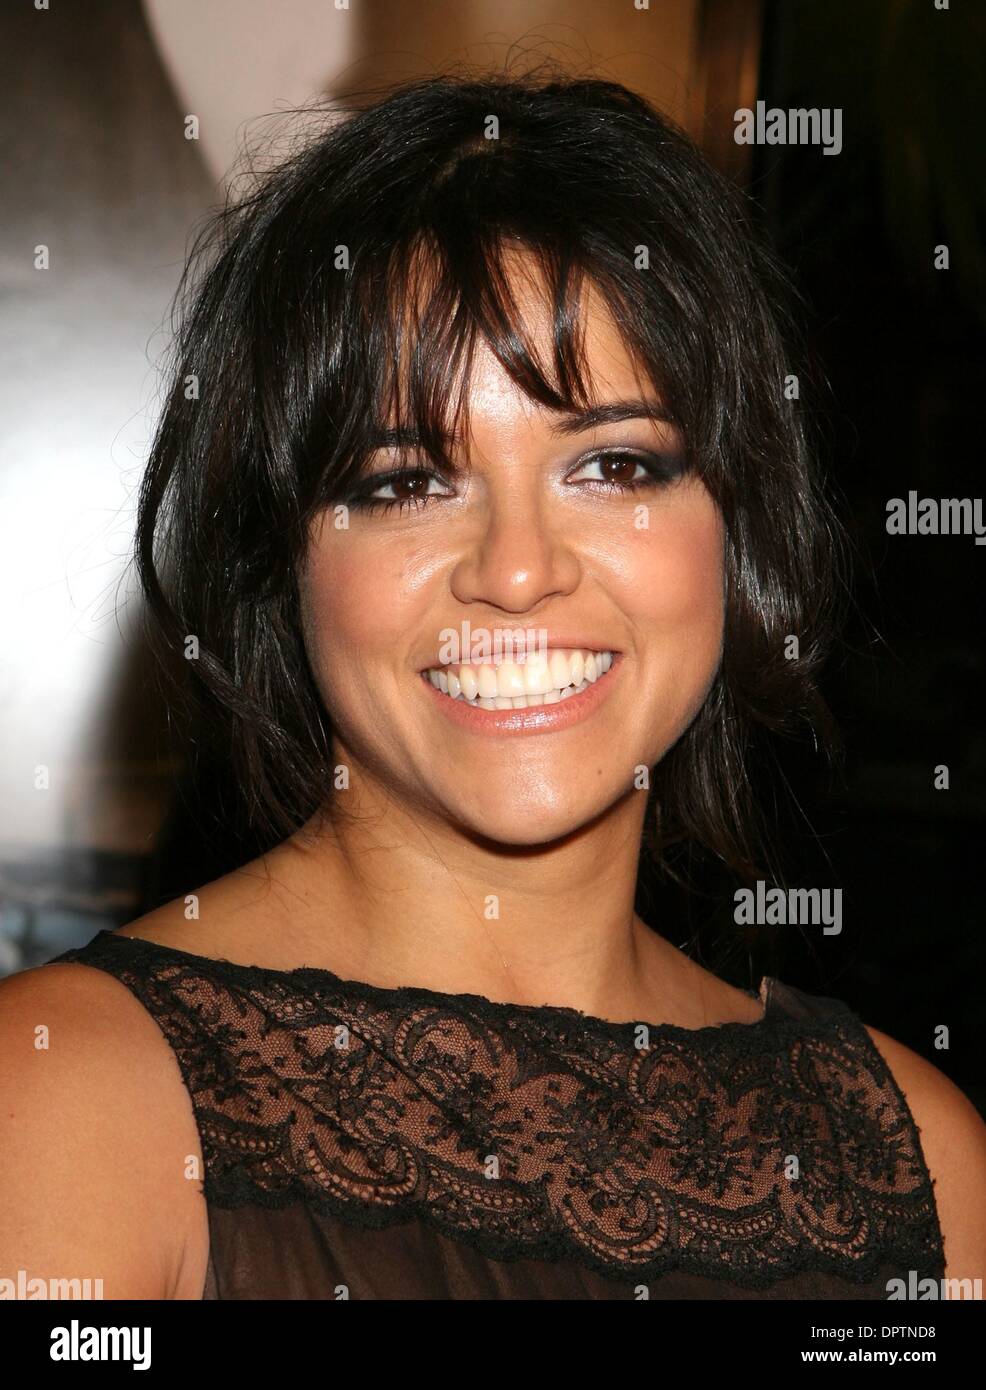 Mar 12, 2009 - Los Angeles, California, USA - Actress MICHELLE RODRIGUEZ  at the 'Fast & Furious' World Premiere held at the Gibson Ampitheater, Universal Studios. (Credit Image: Â© Paul Fenton/ZUMA Press) Stock Photo